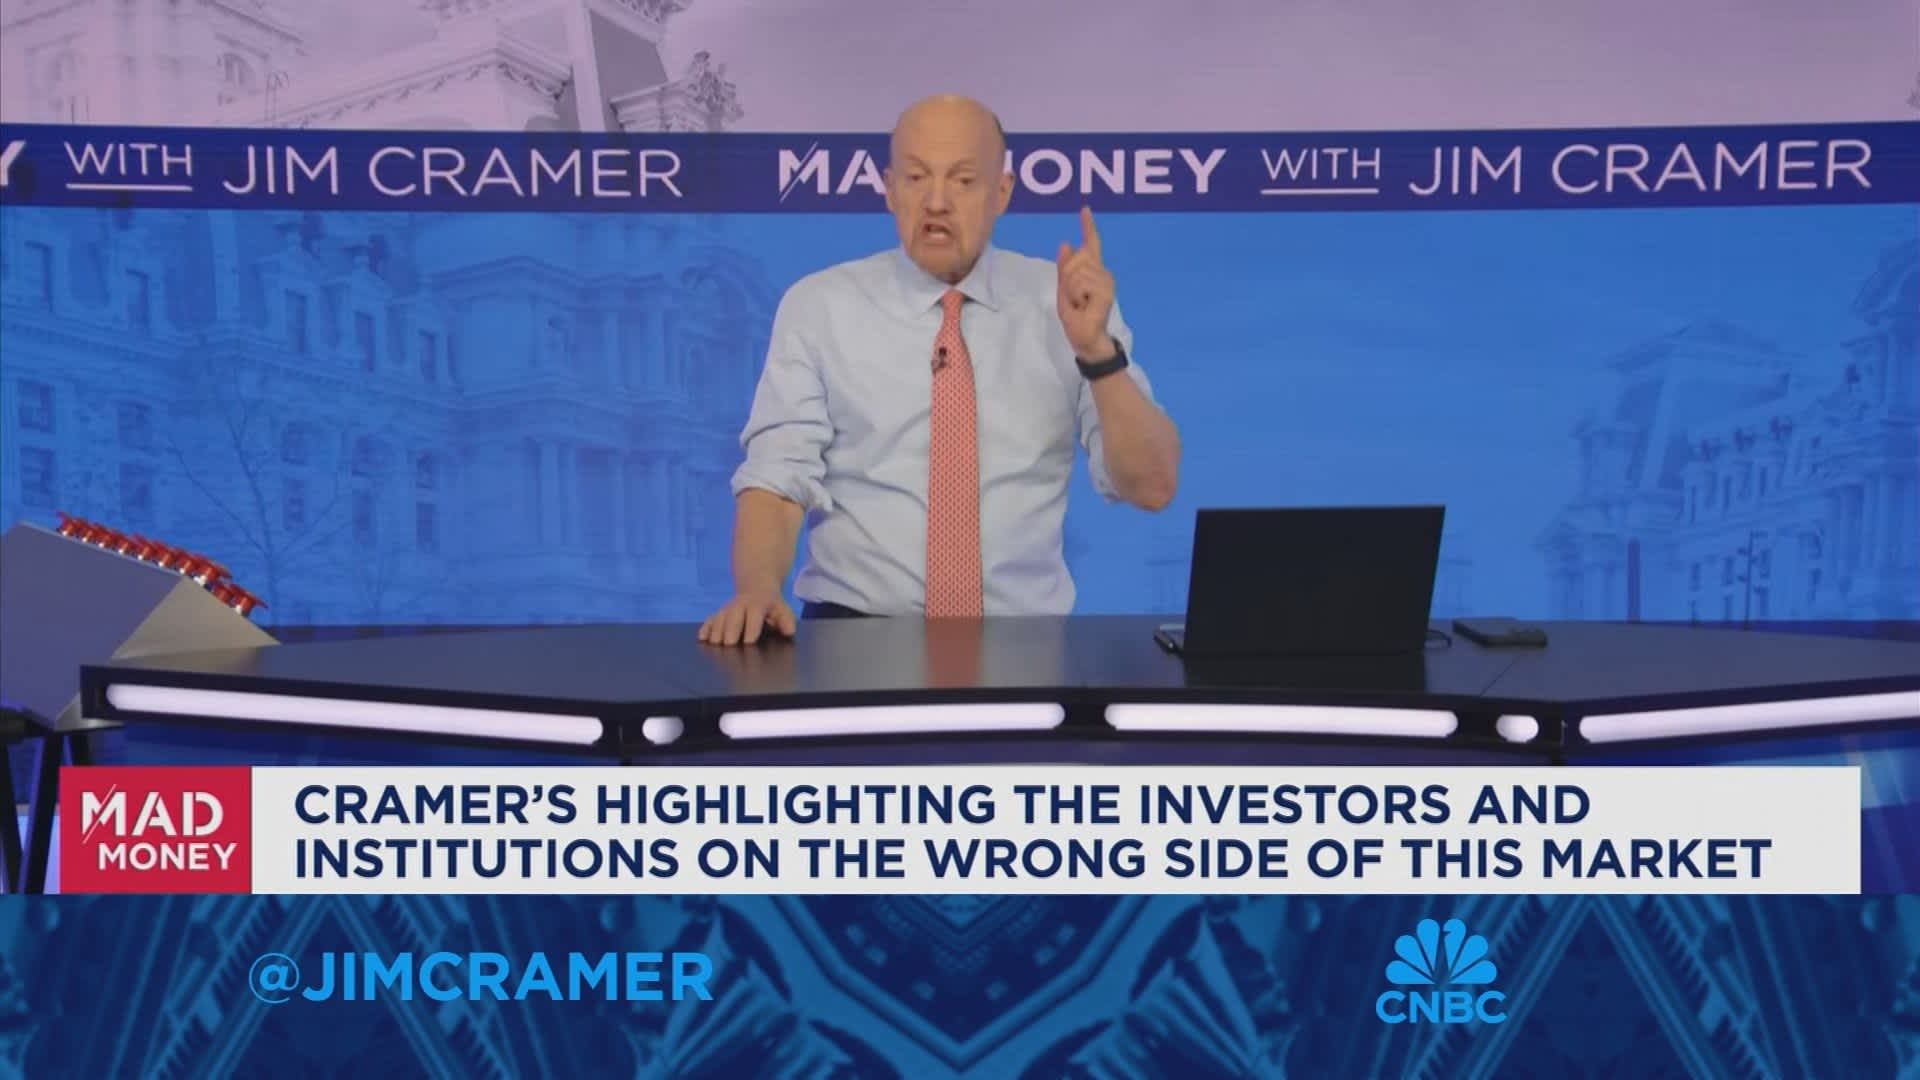 Arm is an extreme example of 'froth' in this market, says Jim Cramer